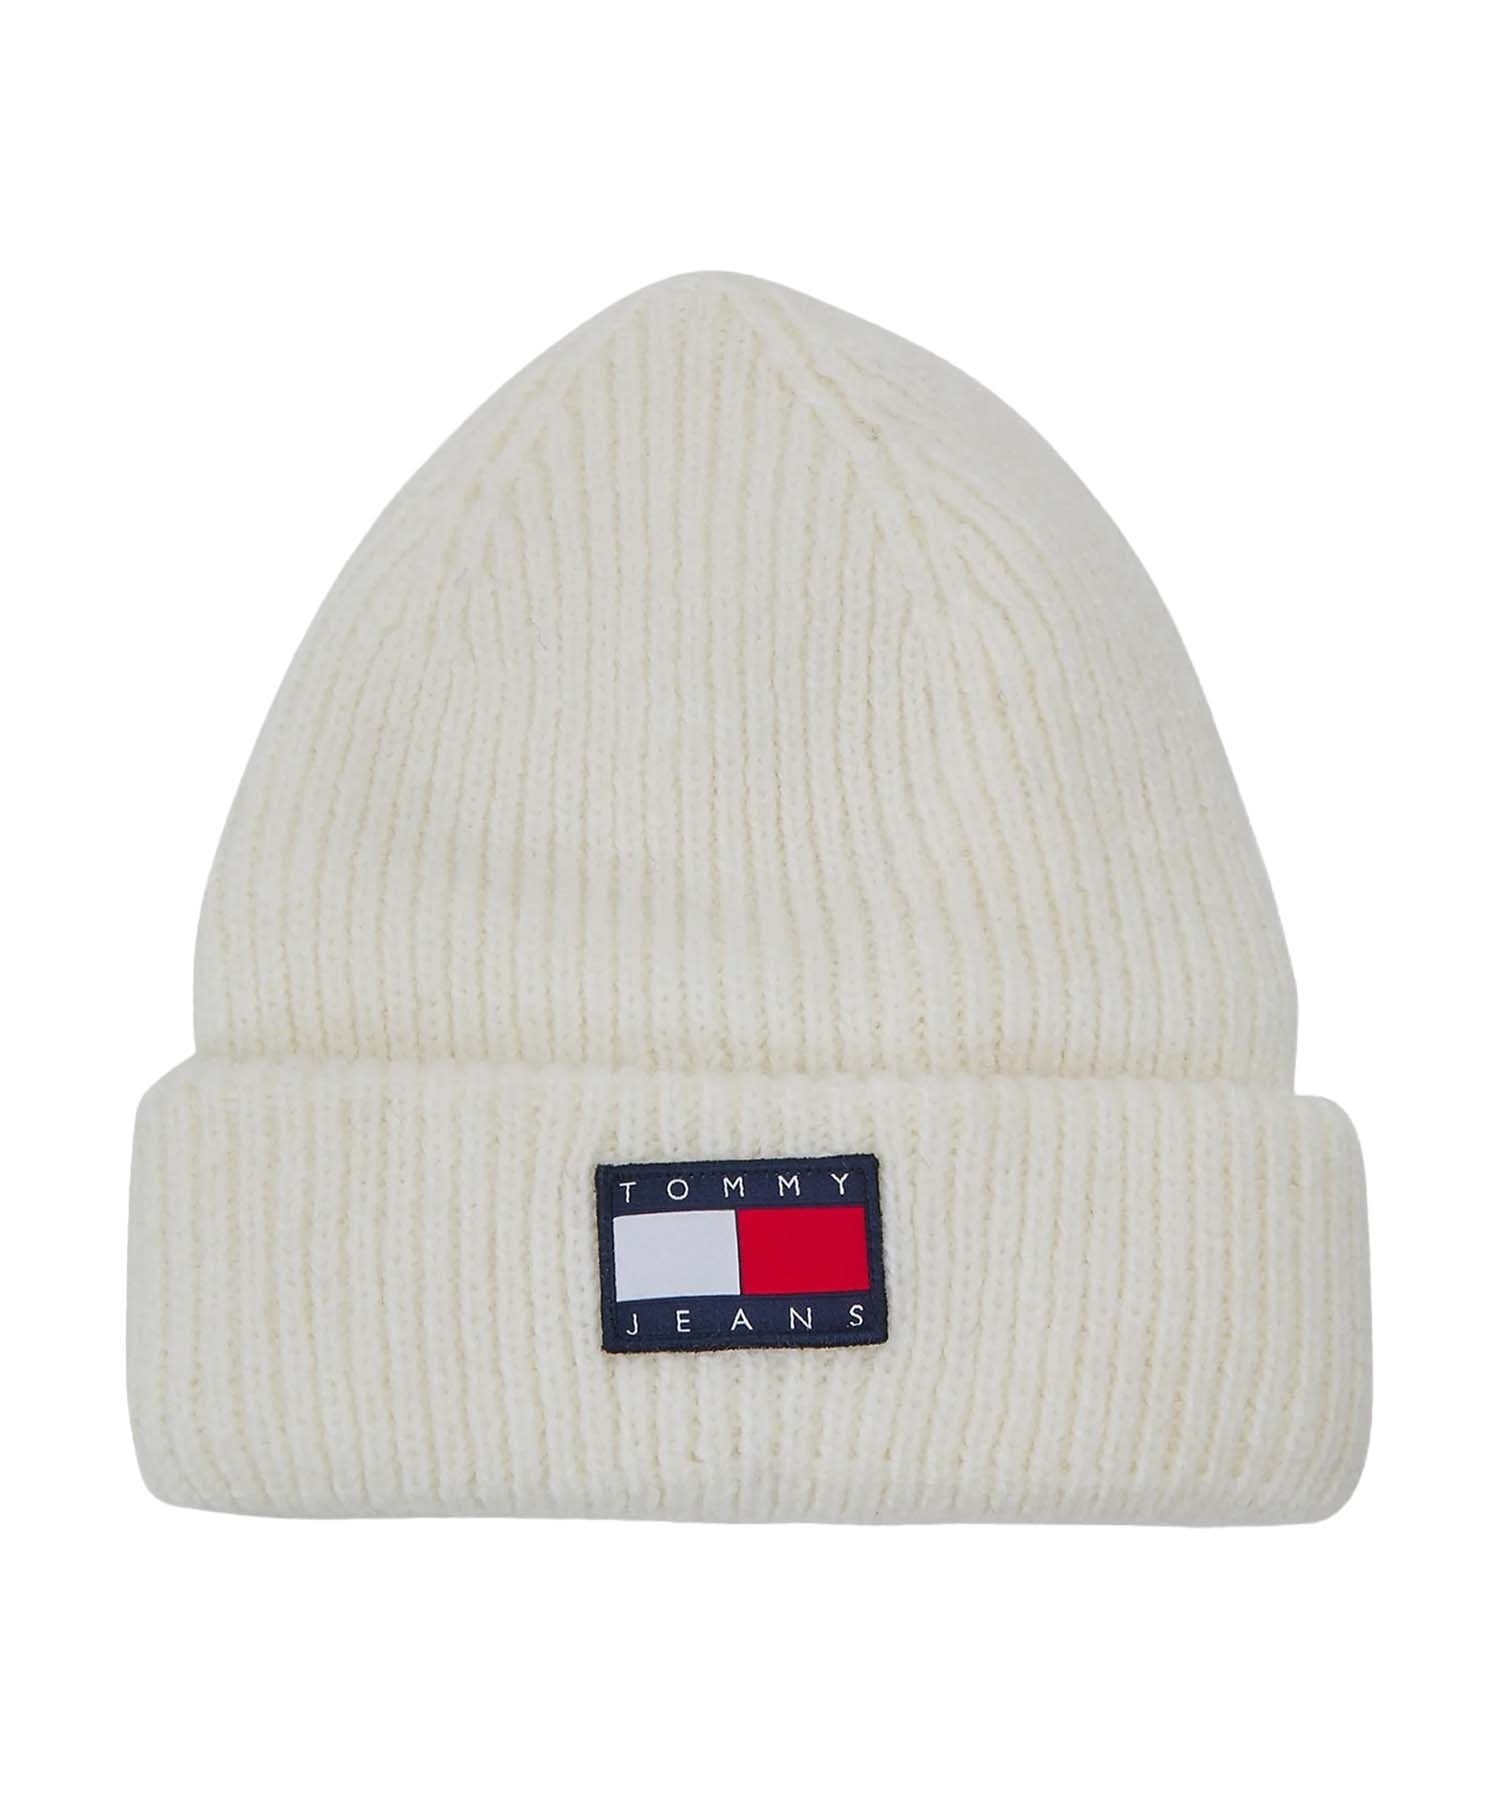 TOMMY JEANS/トミージーンズ ビーニー ニット帽 ダブル SOFT READY BEANIE AW15464(WT/NV-FREE)